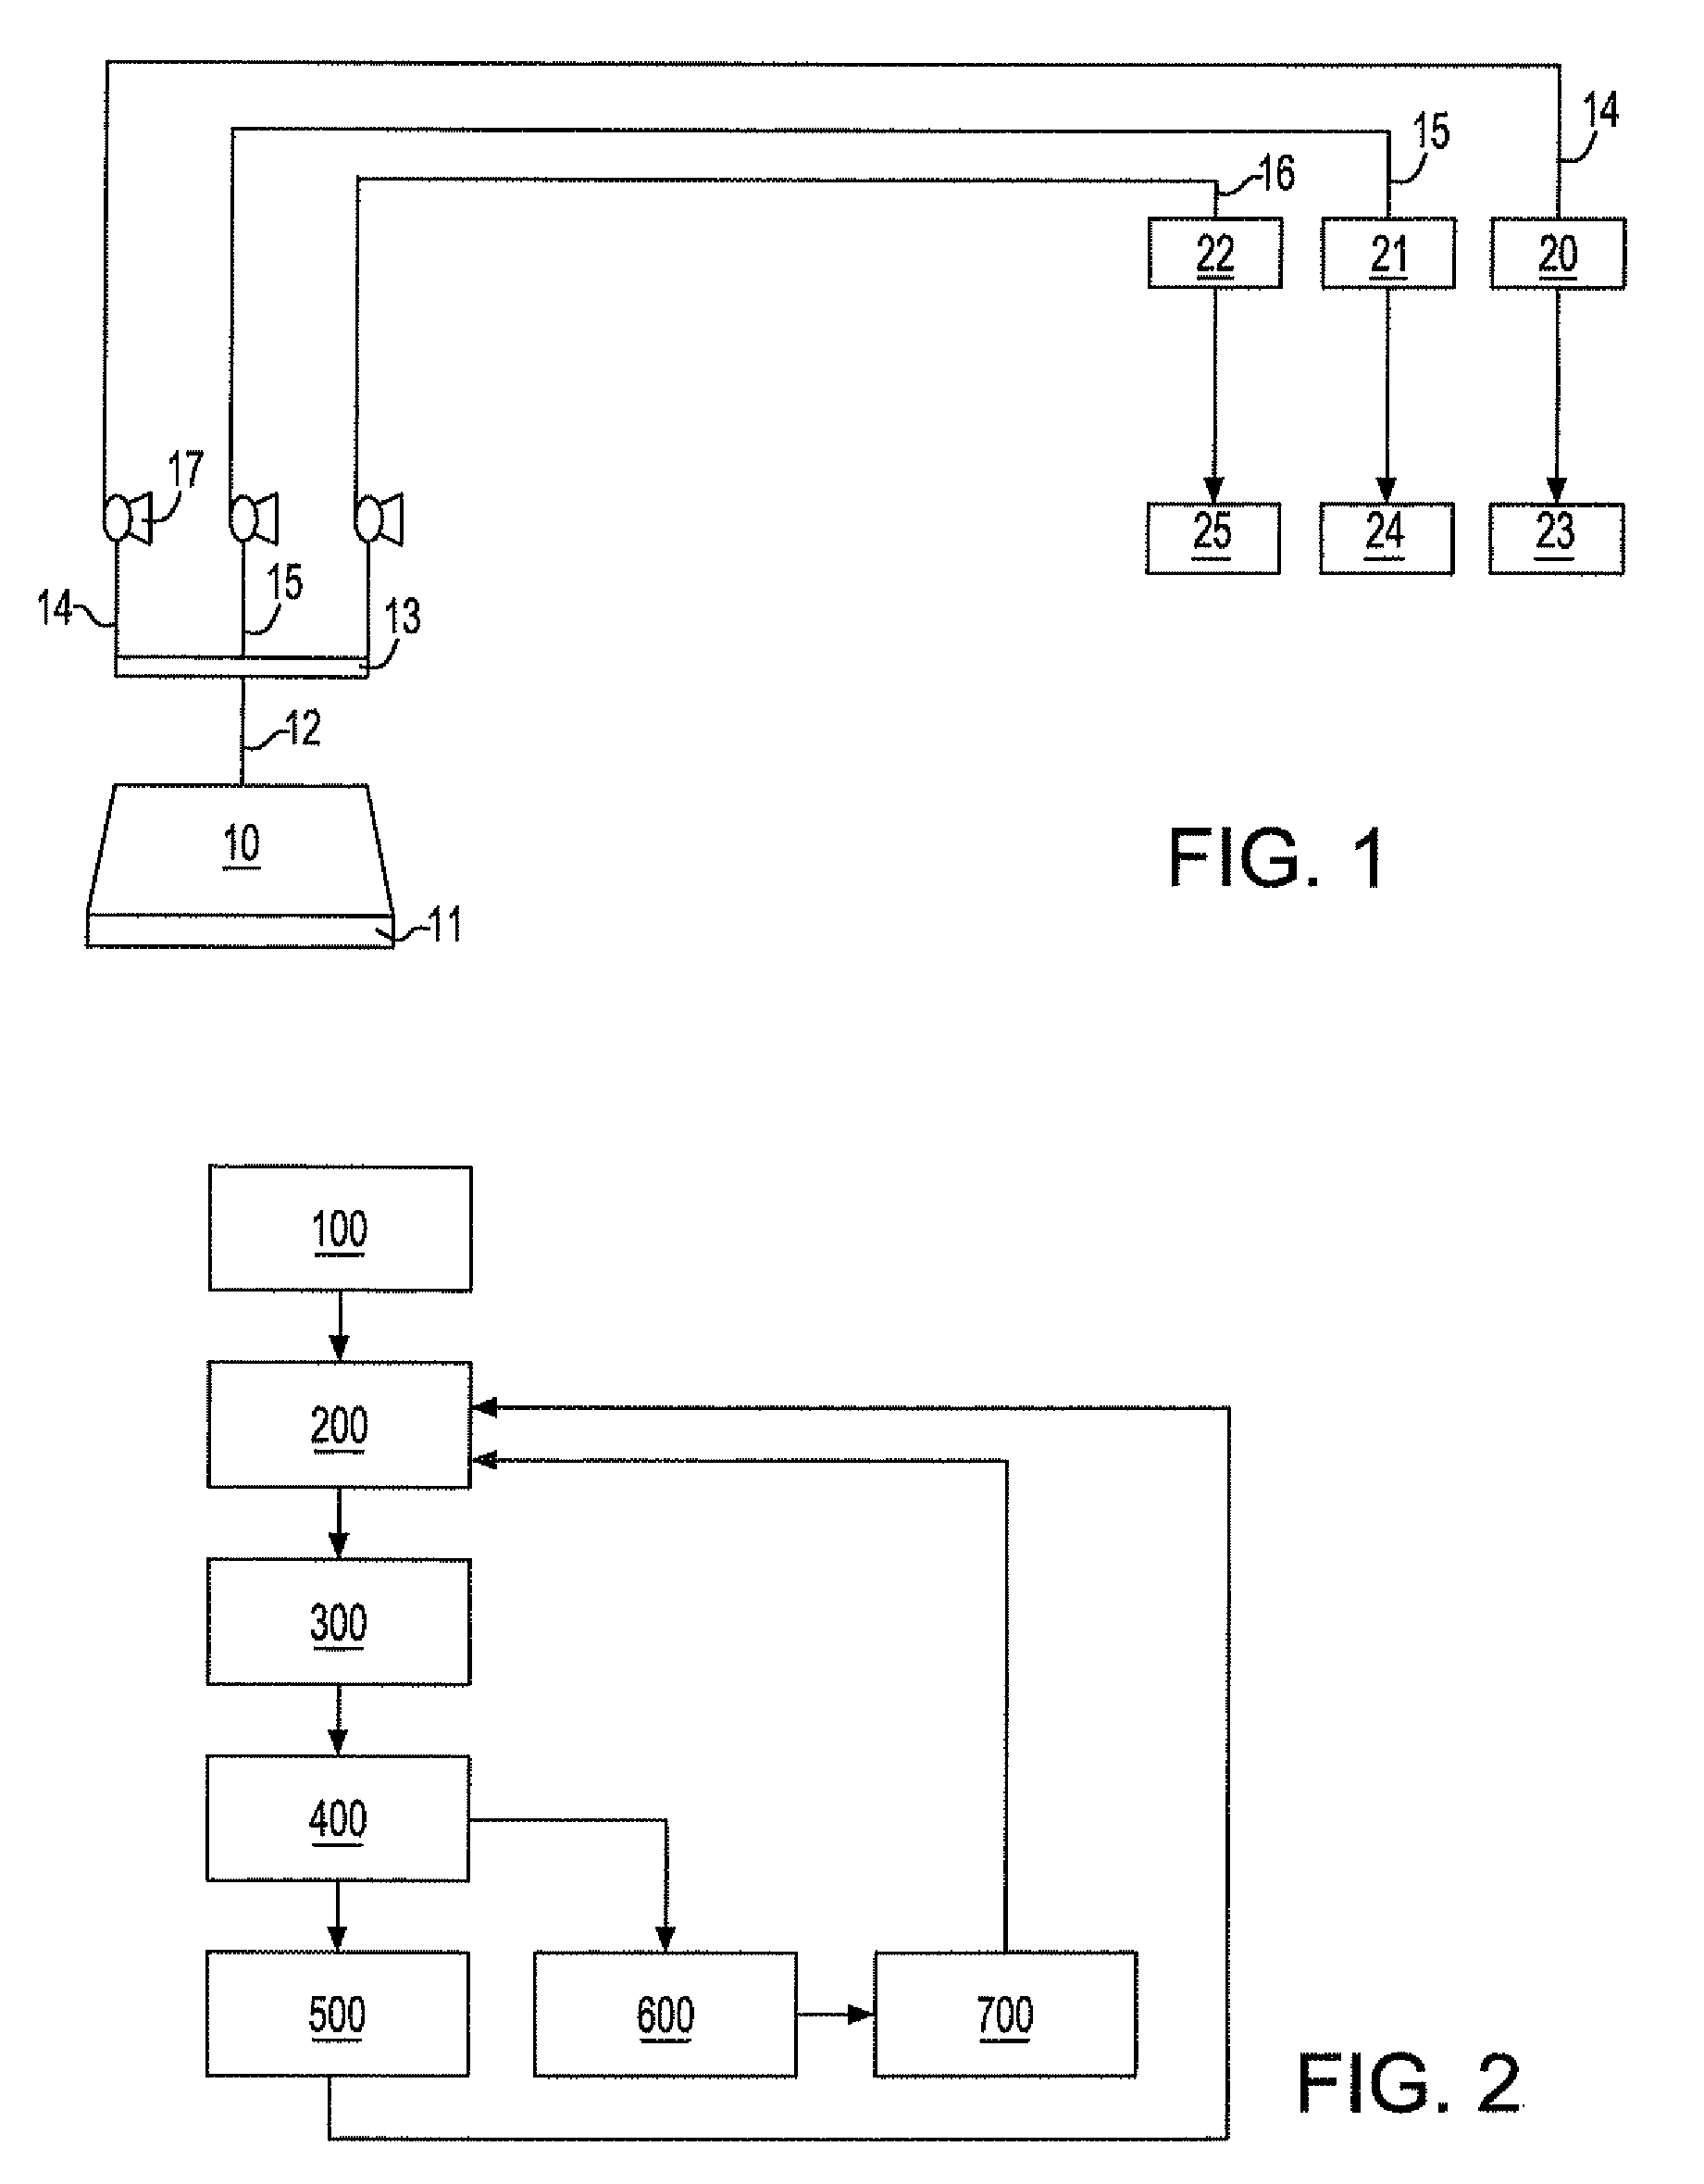 Process of monitoring dispensing of process fluids in precision processing operations